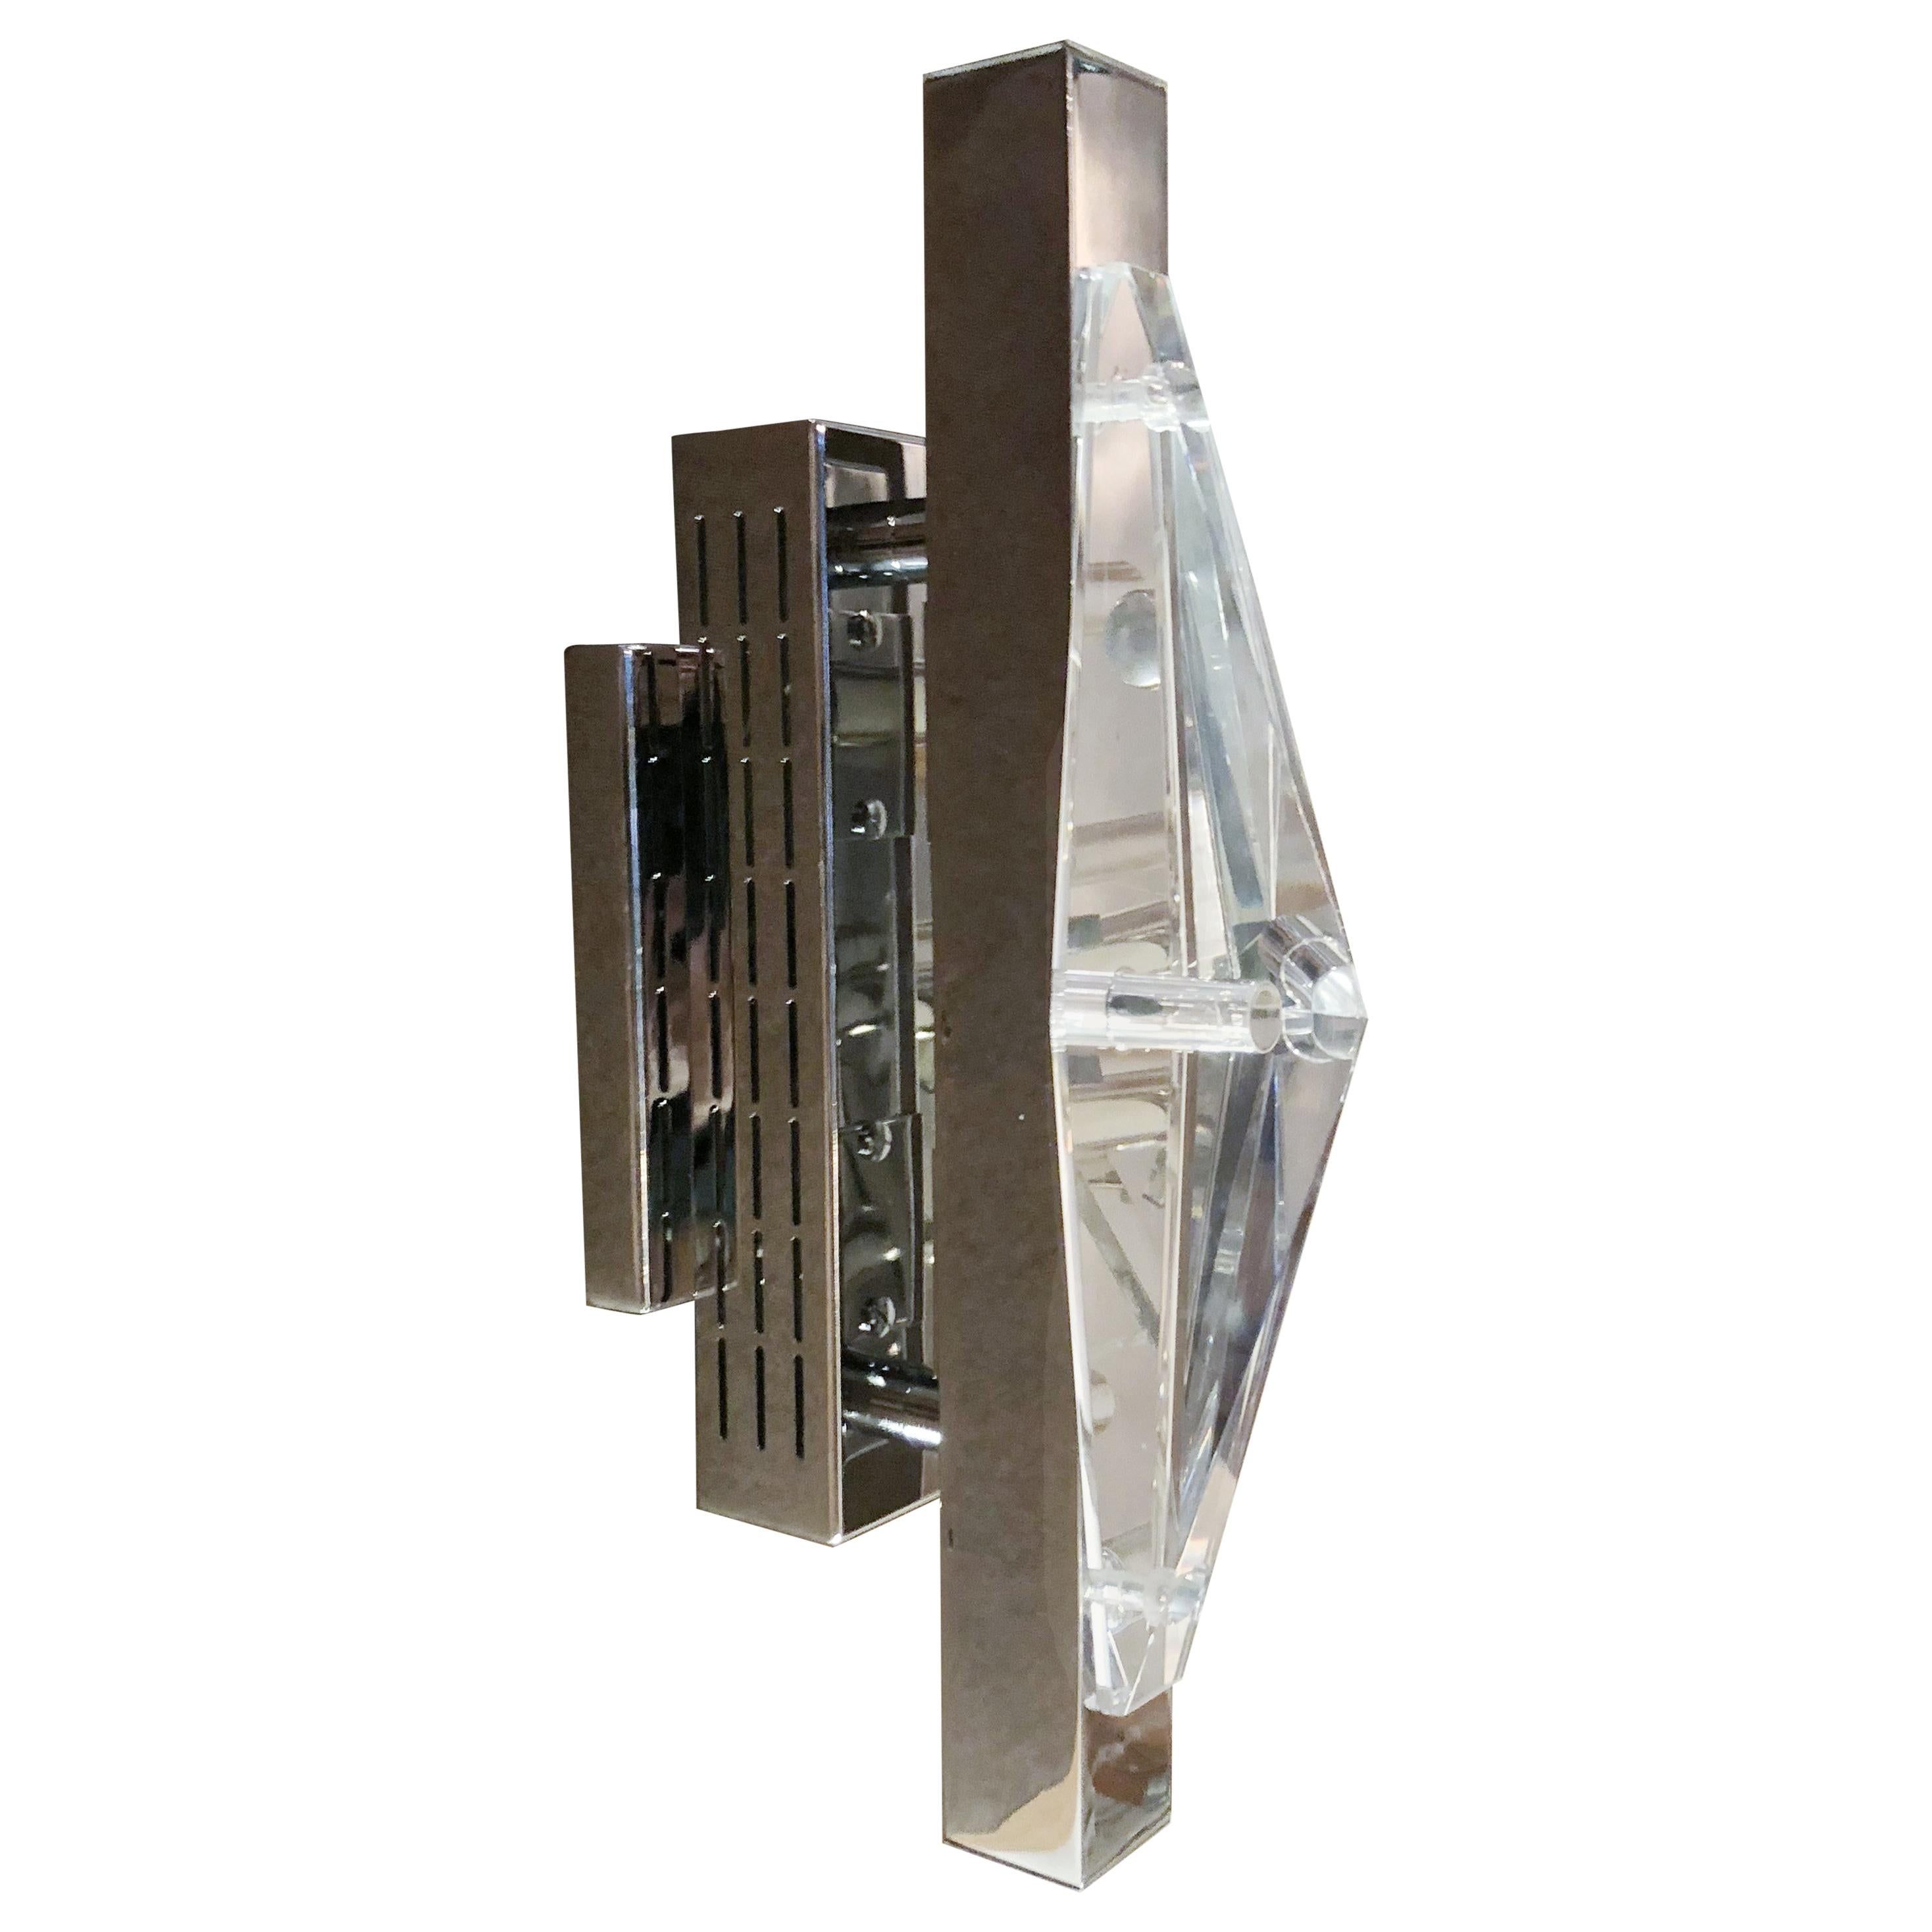 Limited edition Italian wall light or flush mount with clear faceted crystal on chrome finish / Designed by Fabio Bergomi for Fabio Ltd / Made in Italy
1 light / G4 LED type/ max 2W
Height: 15.75 inches / Width: 4.25 inches / Depth: 7.5 inches
1